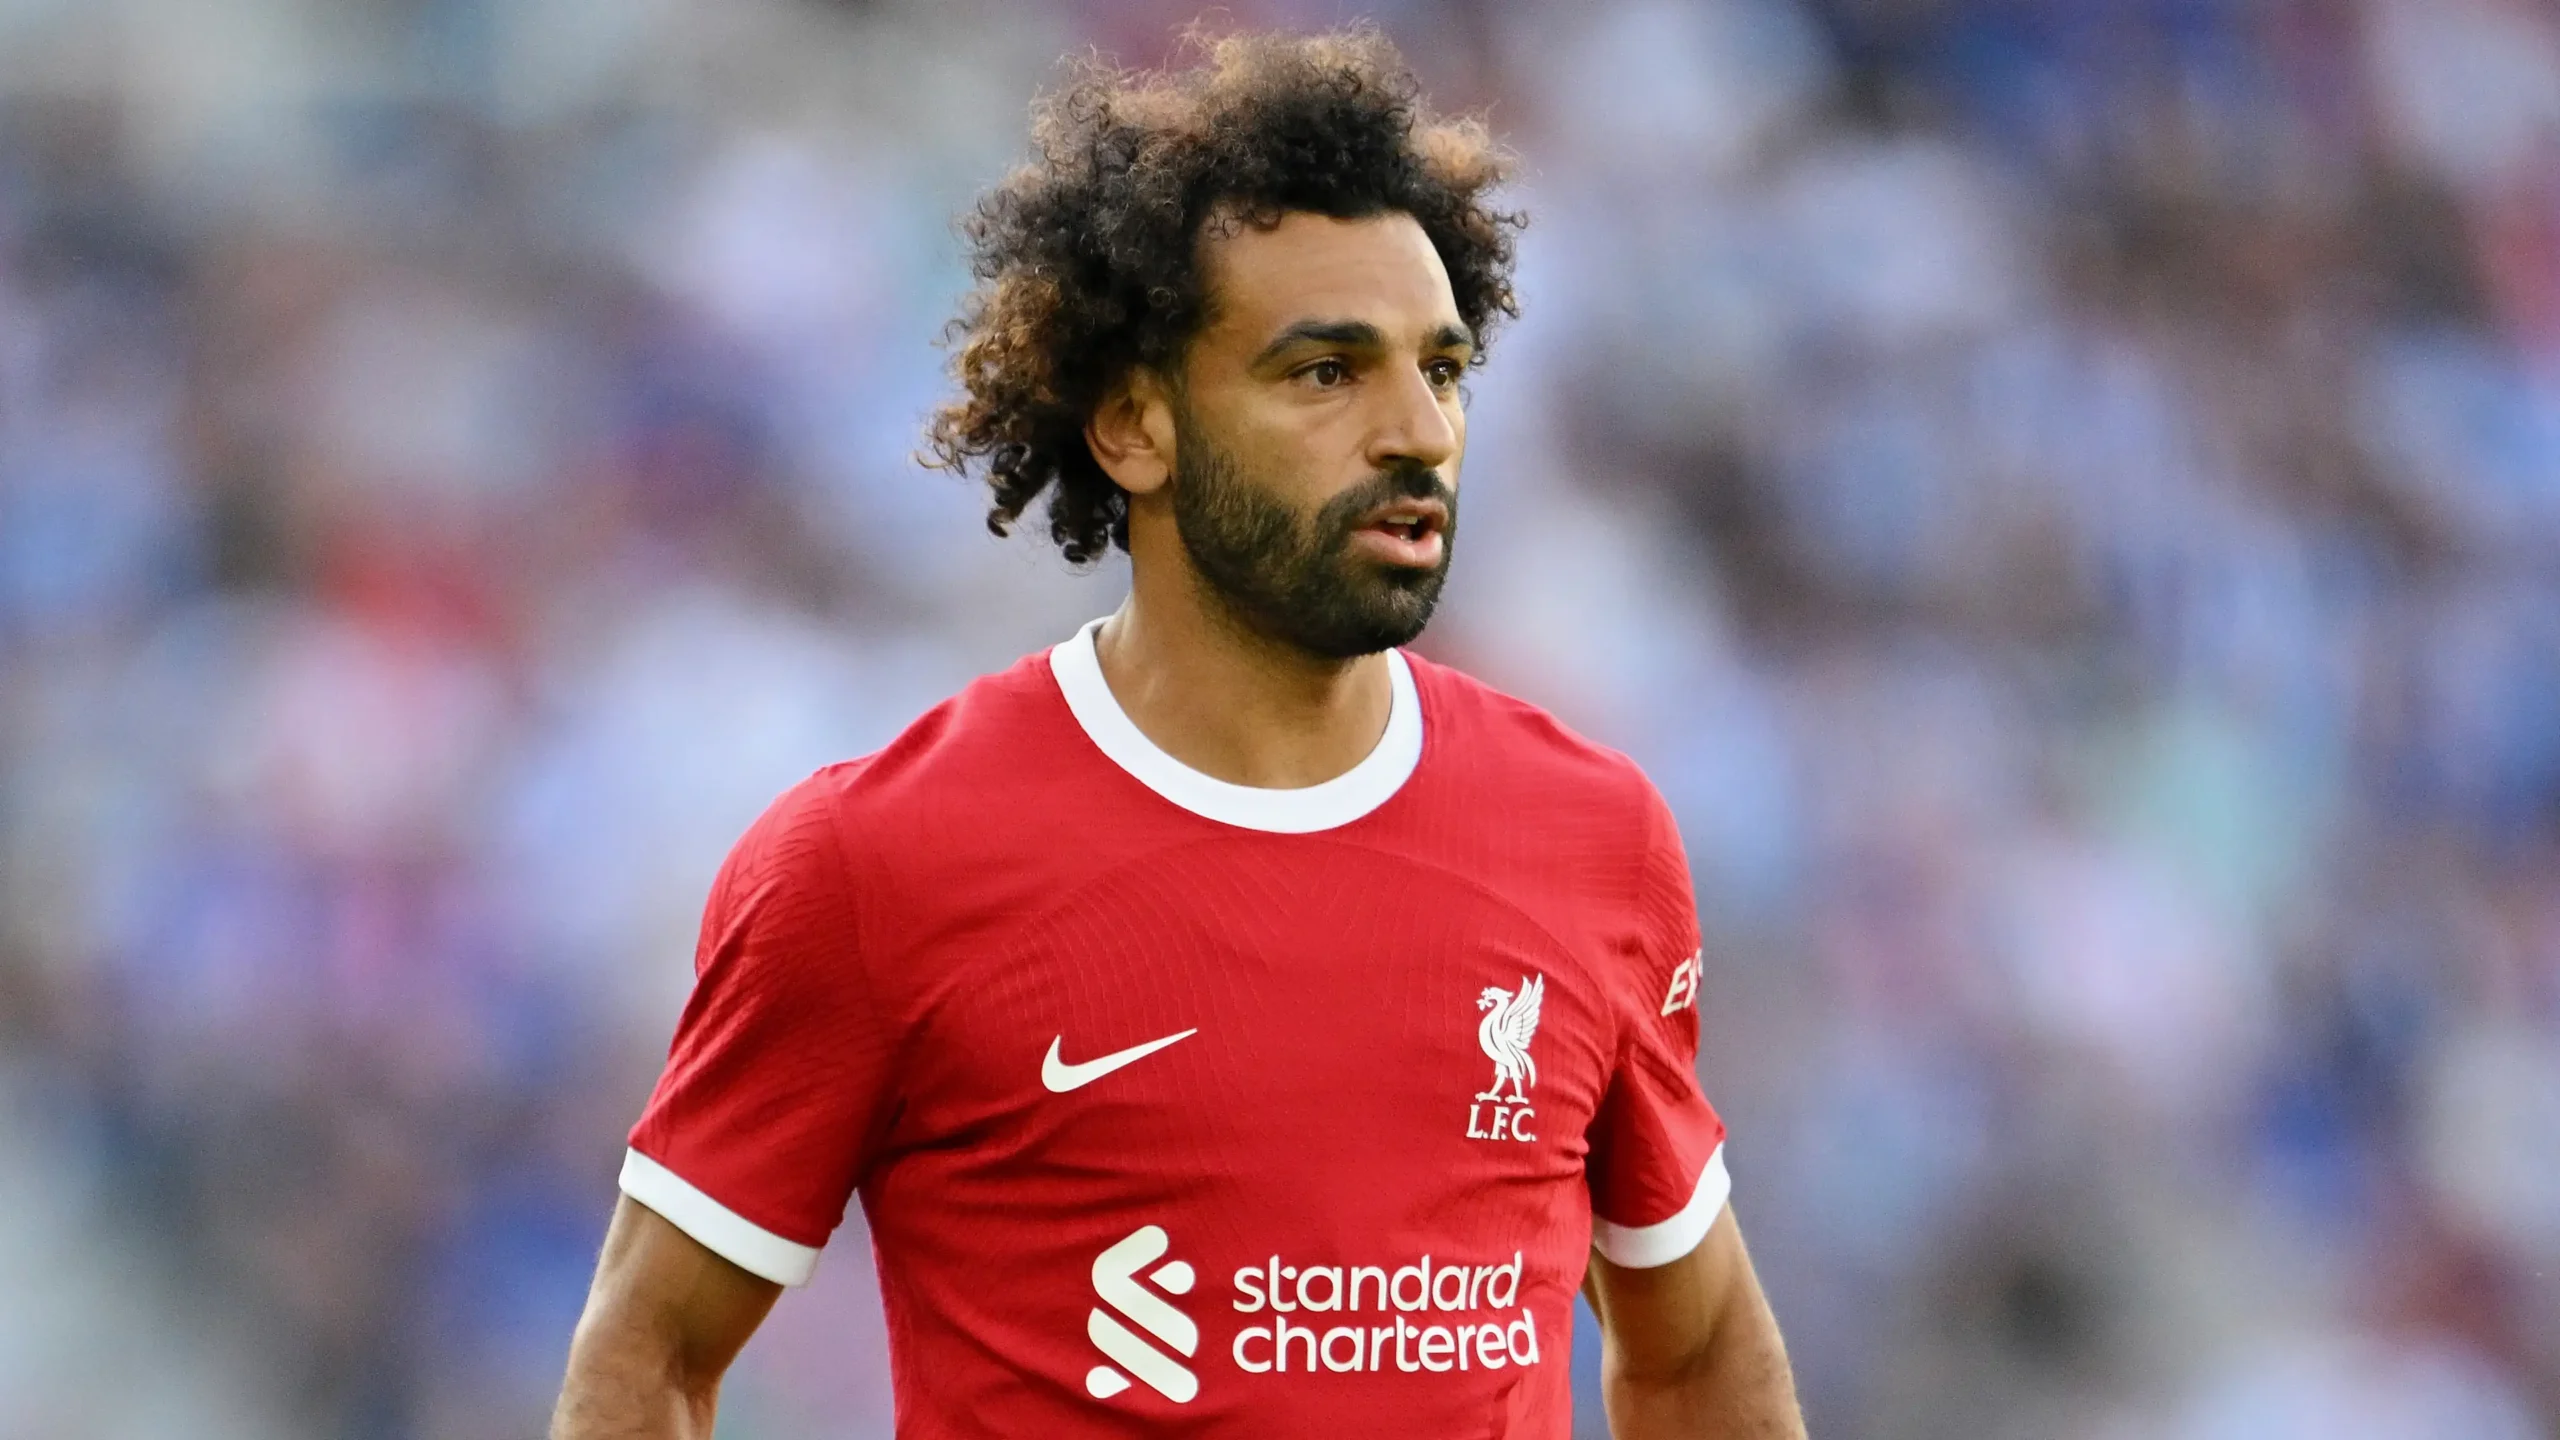 Transfer News Live: Liverpool'S Mohamed Salah Exit Rumors, Man City Pursues Matheus Nunes, And Man United'S Ongoing Search For Signings